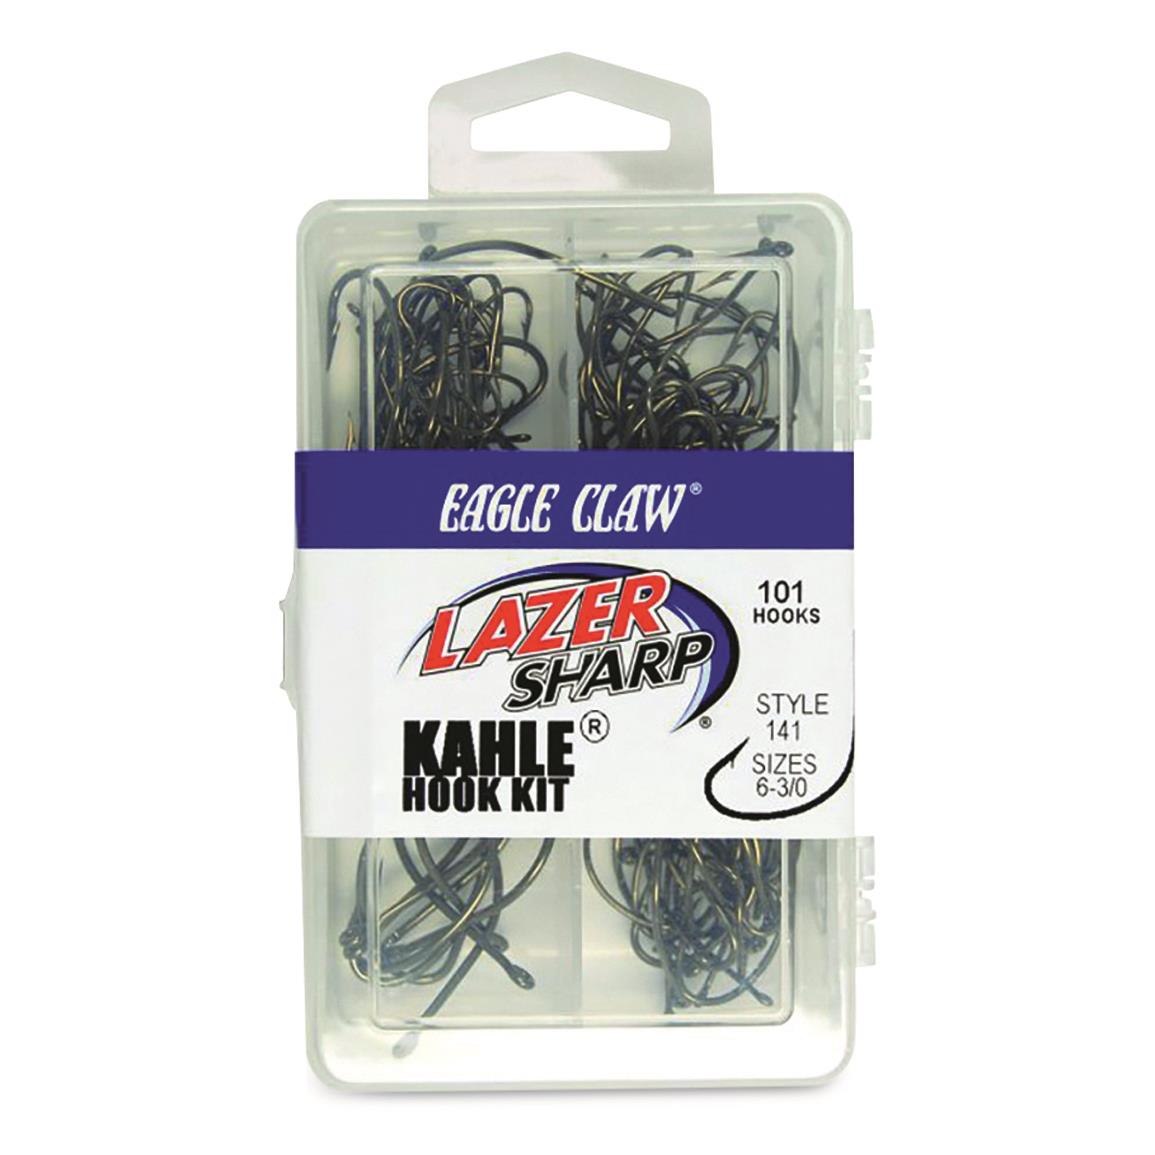 Eagle Claw Kahle Hook Assortment, Bronze, Assorted Sizes - 734310, Tackle  Kits at Sportsman's Guide